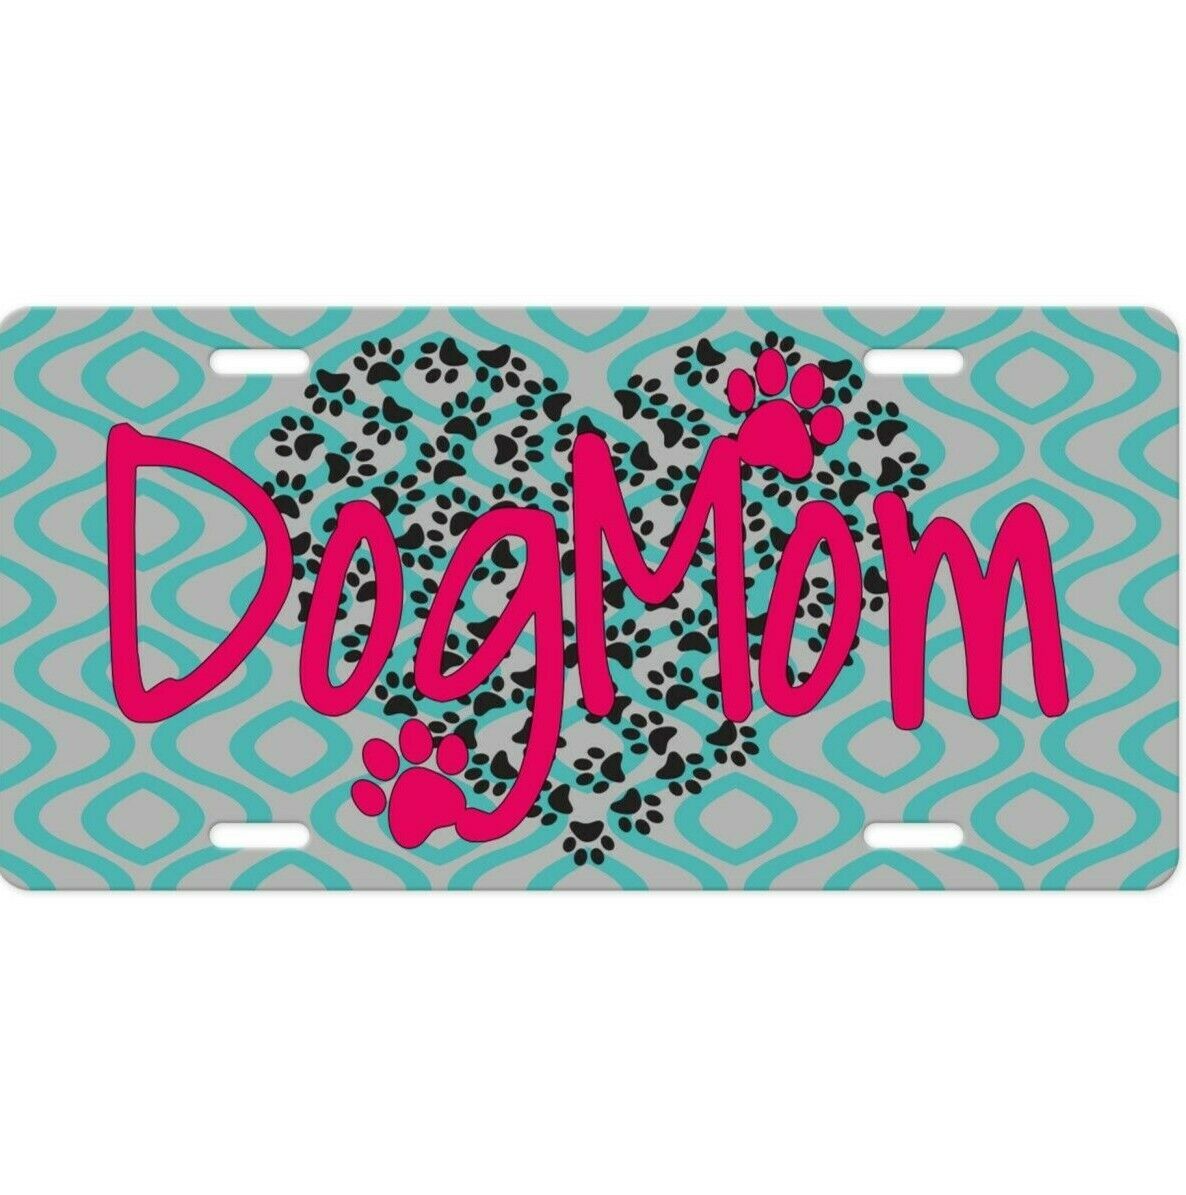 DOG MOM License Plate- Pink Quote-Black Paw Prints Heart-Teal Blue Wavy Pattern 